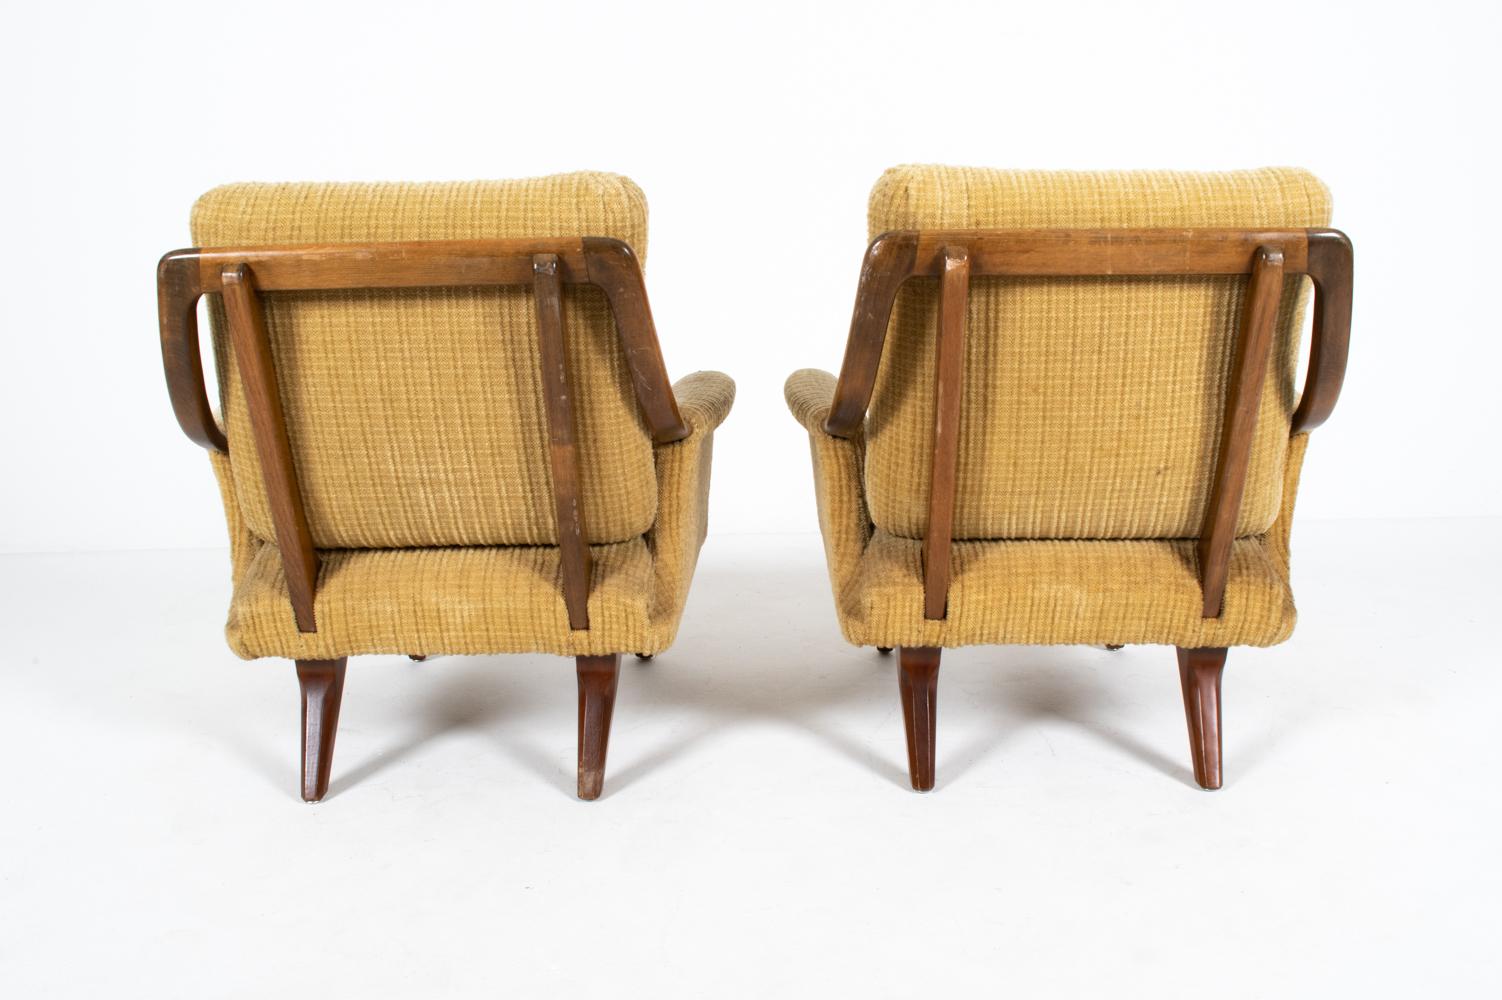 Pair of Scandinavian Mid-Century Lounge Chairs, c. 1950's For Sale 4